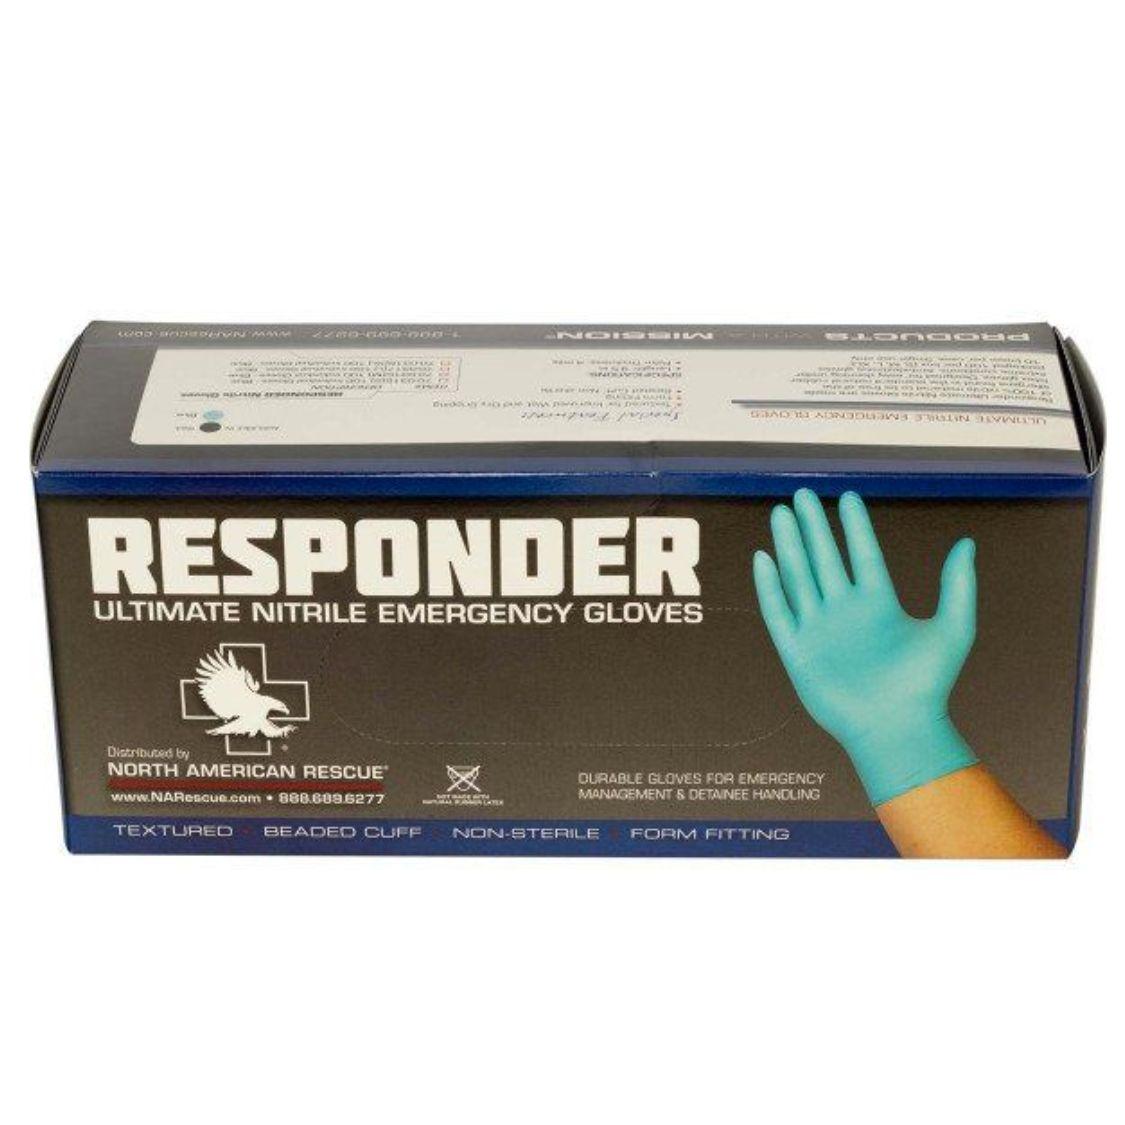 North American Rescue Responder Blue Nitrile Gloves - Box of 100 - Examination Gloves